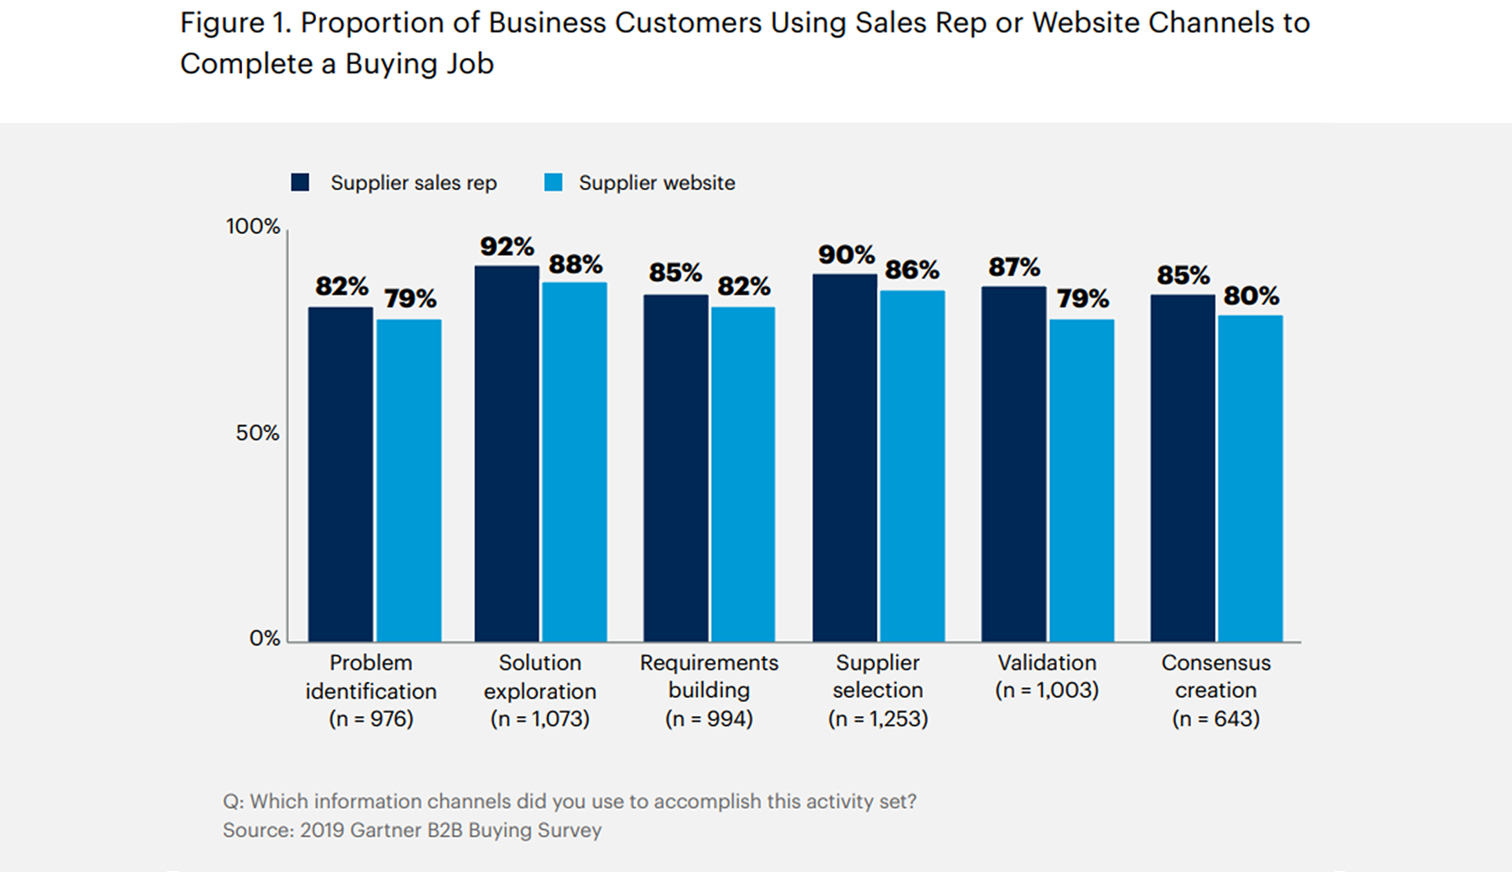 Proportion of Business Customers Using Sales Rep or Website Channels to Complete a Buying Job